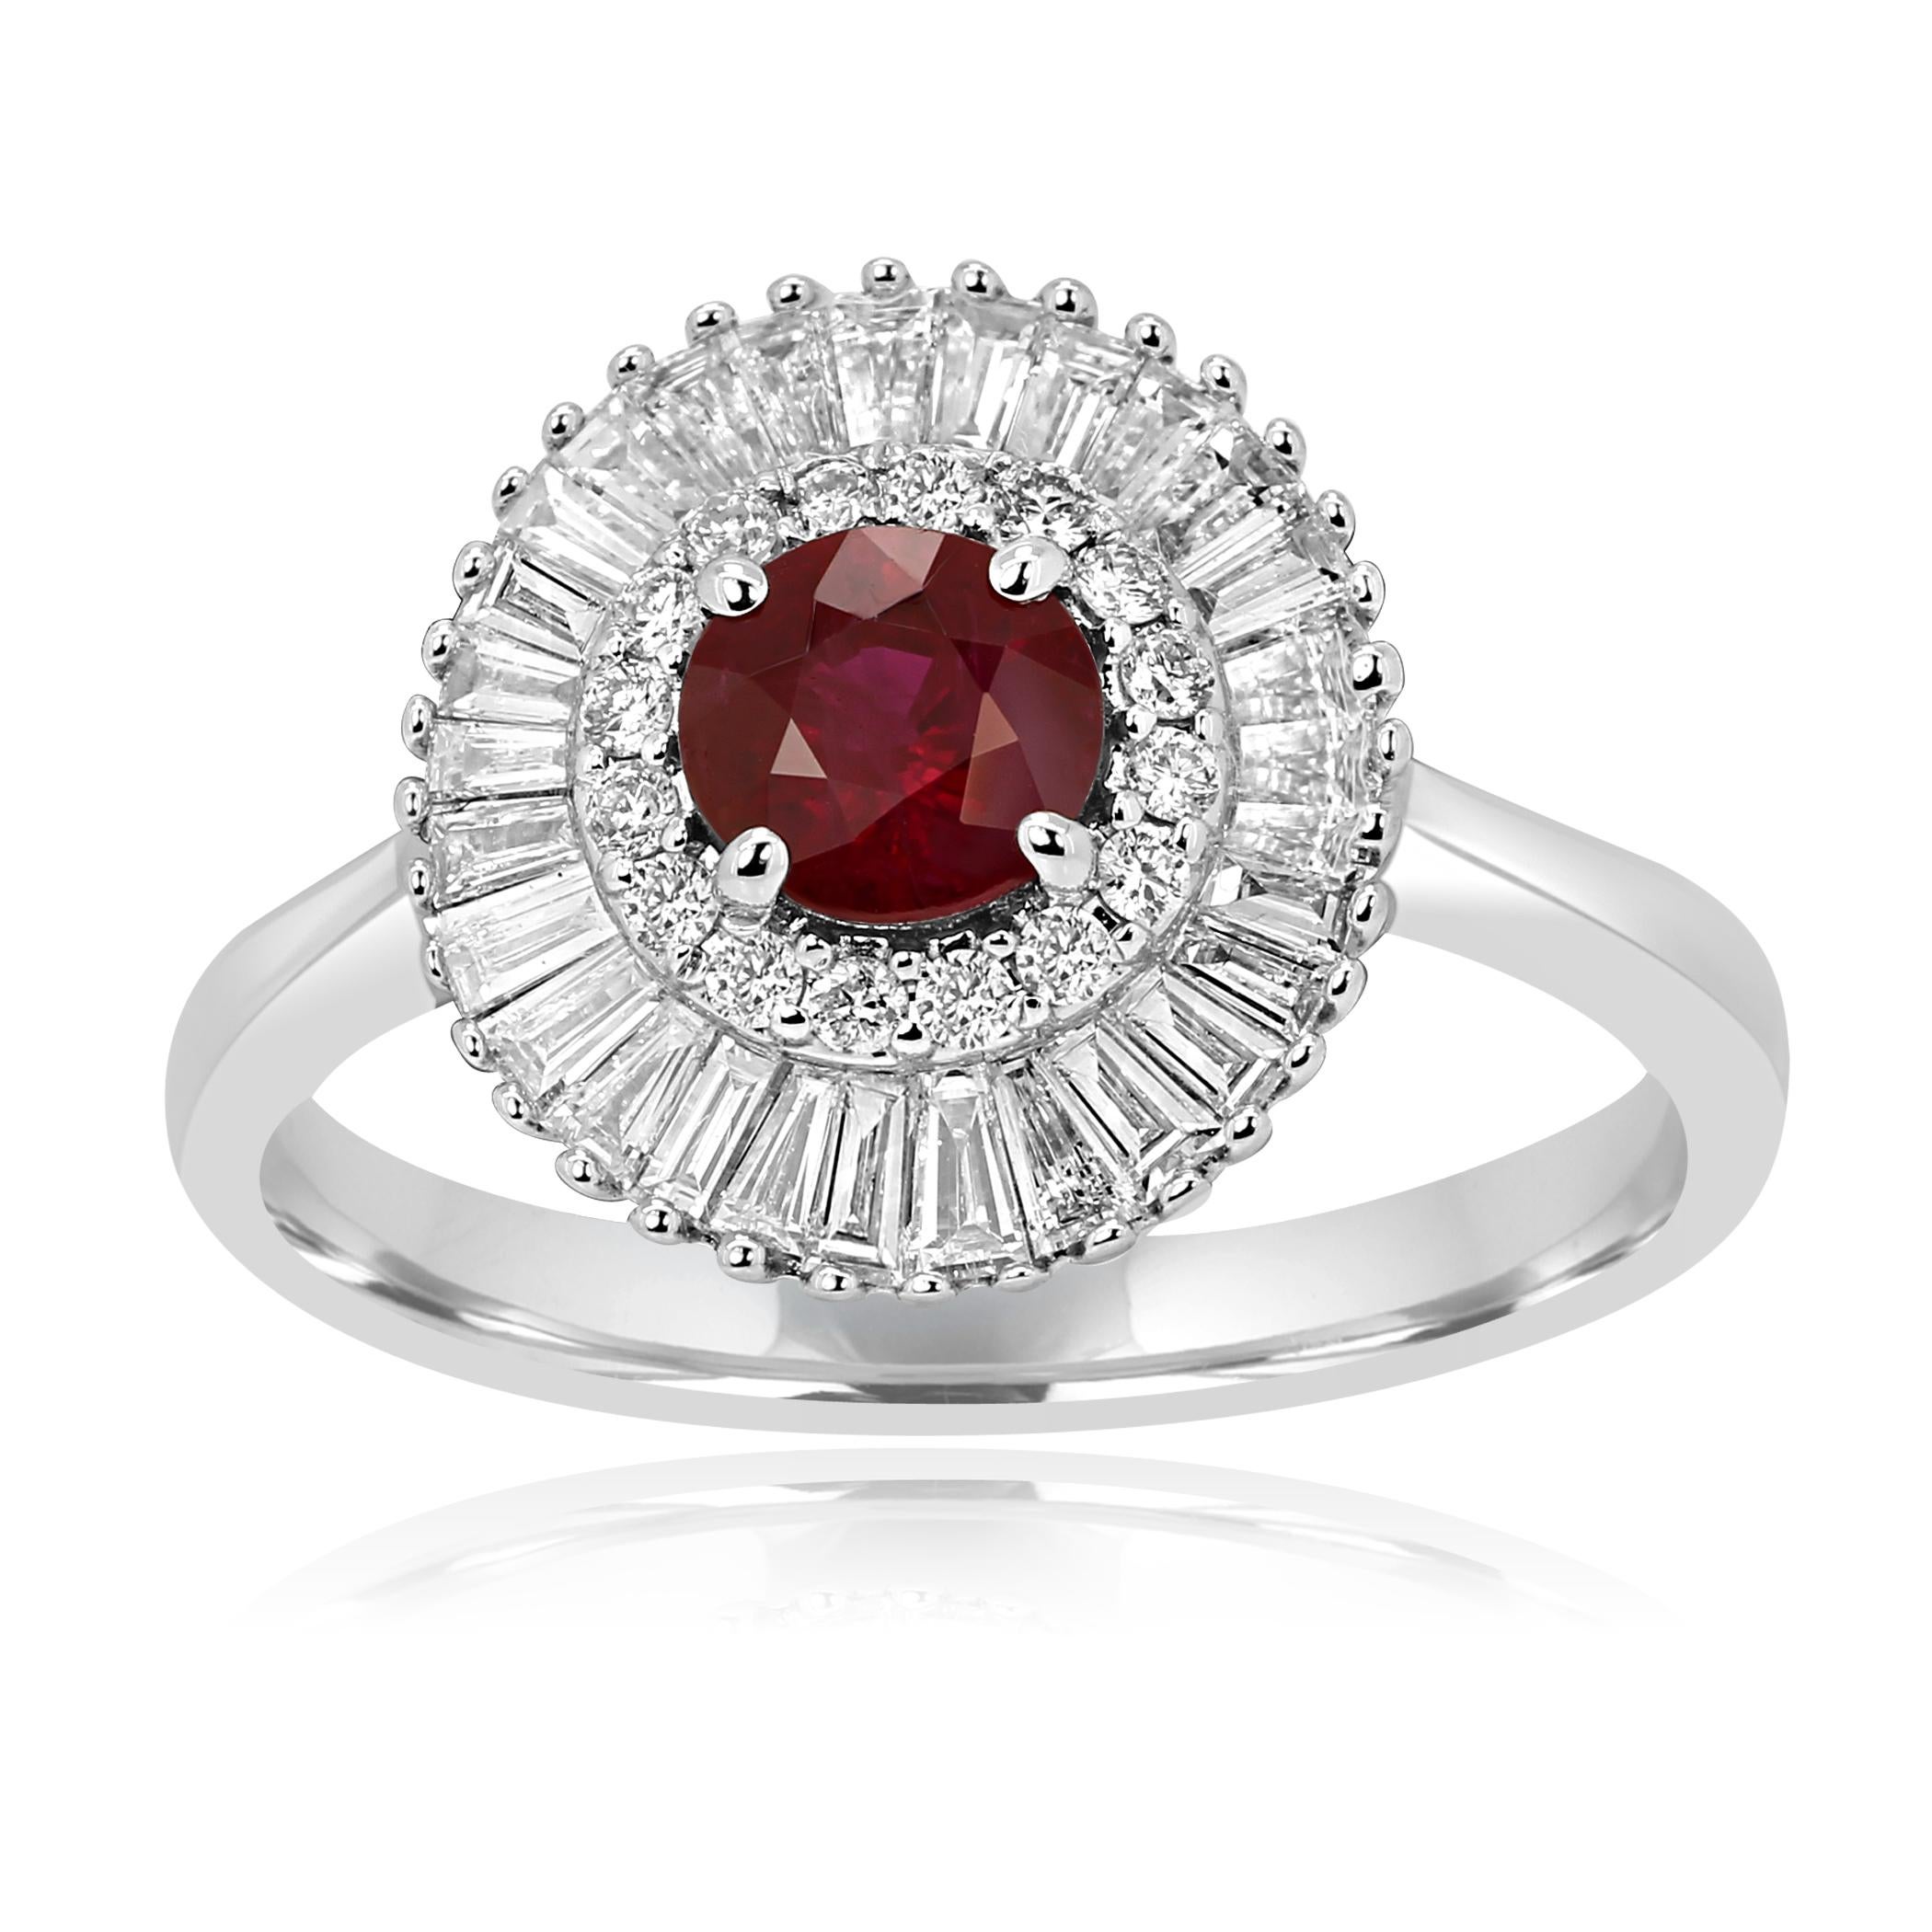 Ruby round 0.70 Carat Encircled in Double Halo of Colorless Round Brilliant VS SI clarity 0.11 Carat and Colorless Diamond Baguettes VS clarity 0.45 Carat in 14K Yellow Gold Bridal Cocktail Ballerina Ring.

Style available in different price ranges.